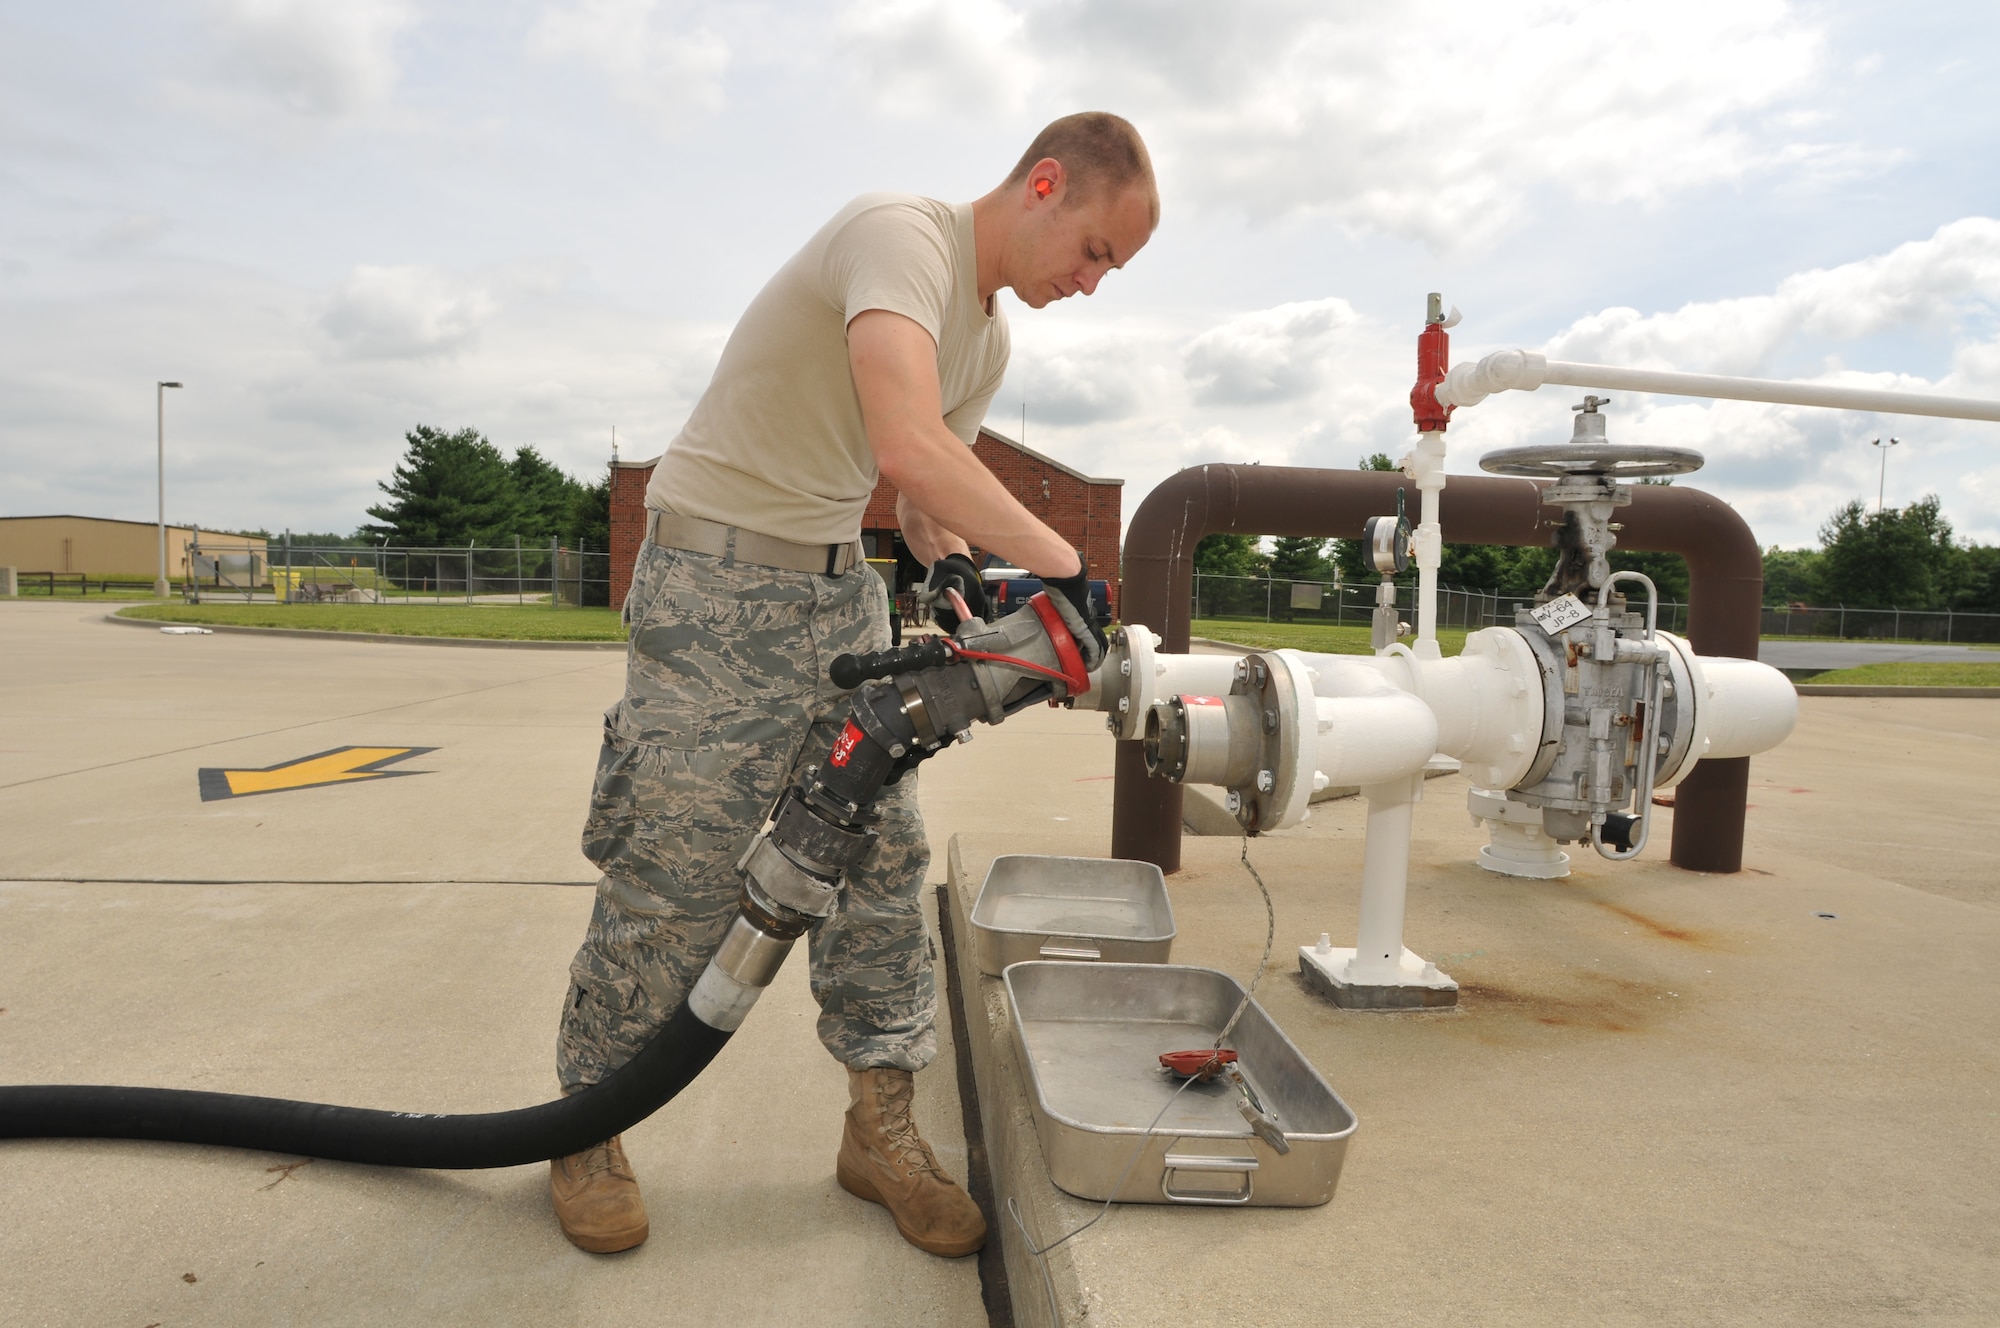 Senior Airman Andrew Kasten, a fuels laboratory technician for the 126th
Fuels Management flight, transfers fuel from holding tanks to a fuel truck
located at the 126th Air Refueling Wing, Scott AFB, Ill. The Illinois Air
National Guard flight was recently named "The Best in the Air National
Guard" and received the Air National Guard Outstanding Fuels Management
Flight Award for the best fuels operations for 2009. (U.S. Air Force photo
by Master Sgt. Ken Stephens)